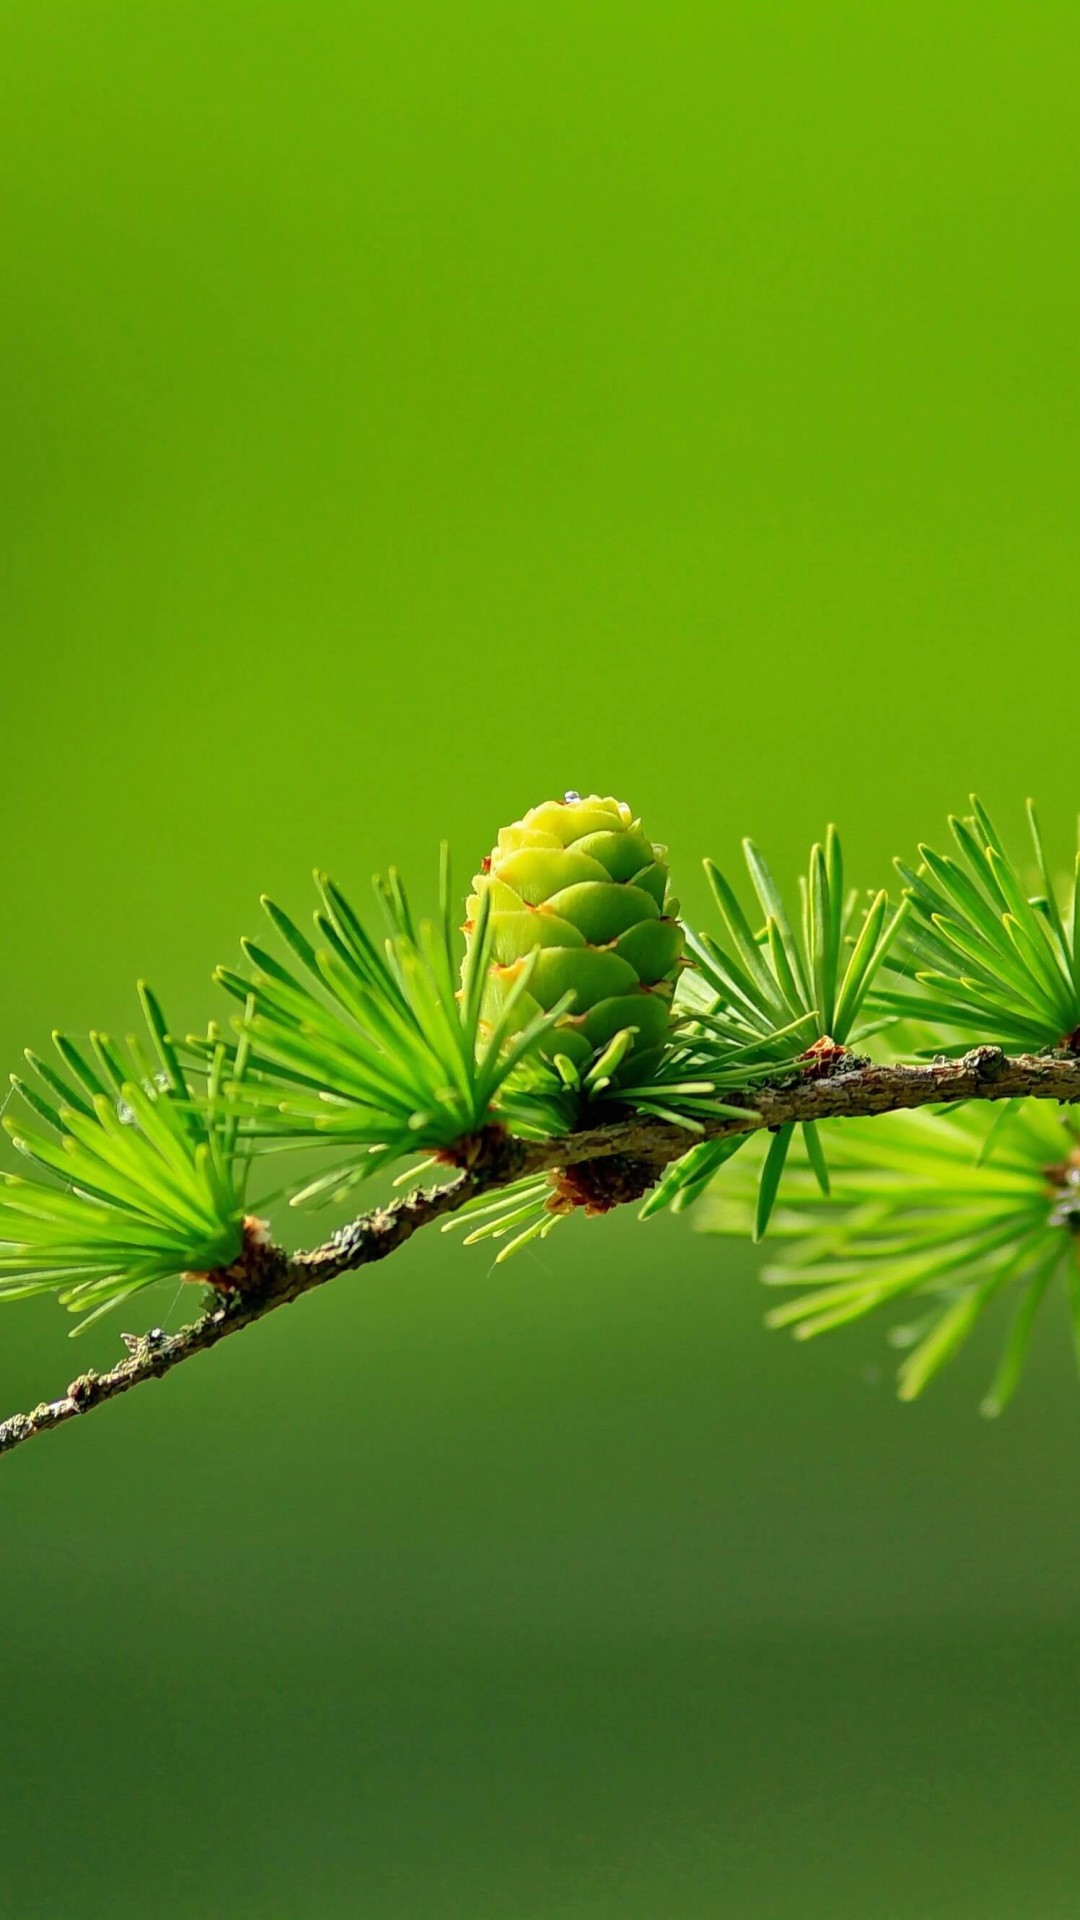 Branch of Pine Tree Wallpaper for SONY Xperia Z1